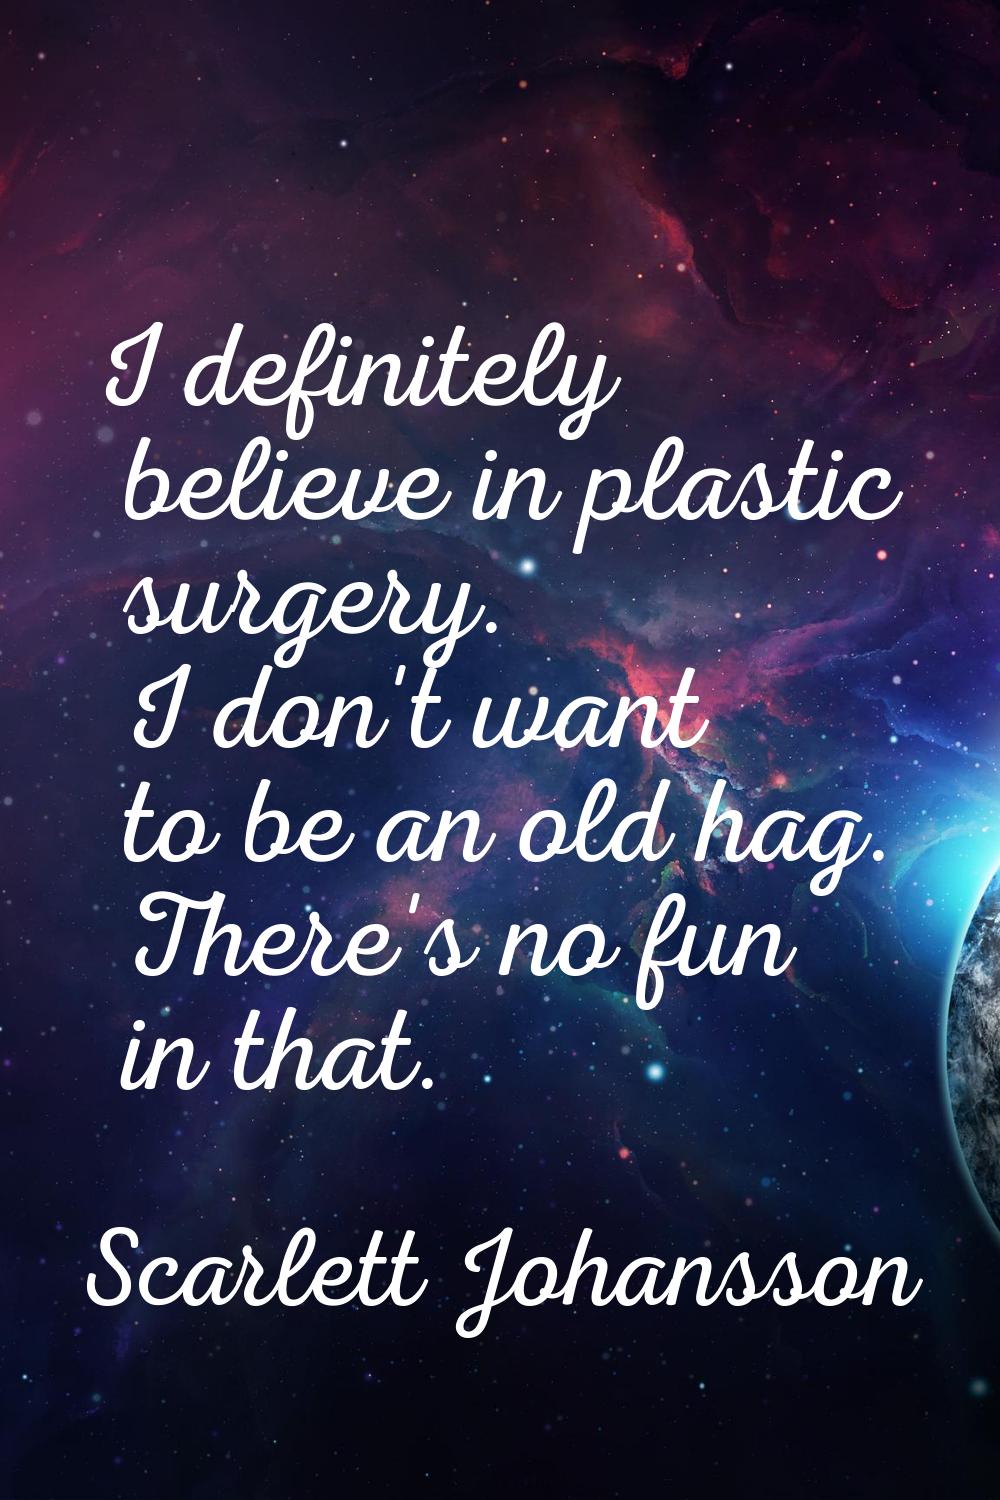 I definitely believe in plastic surgery. I don't want to be an old hag. There's no fun in that.